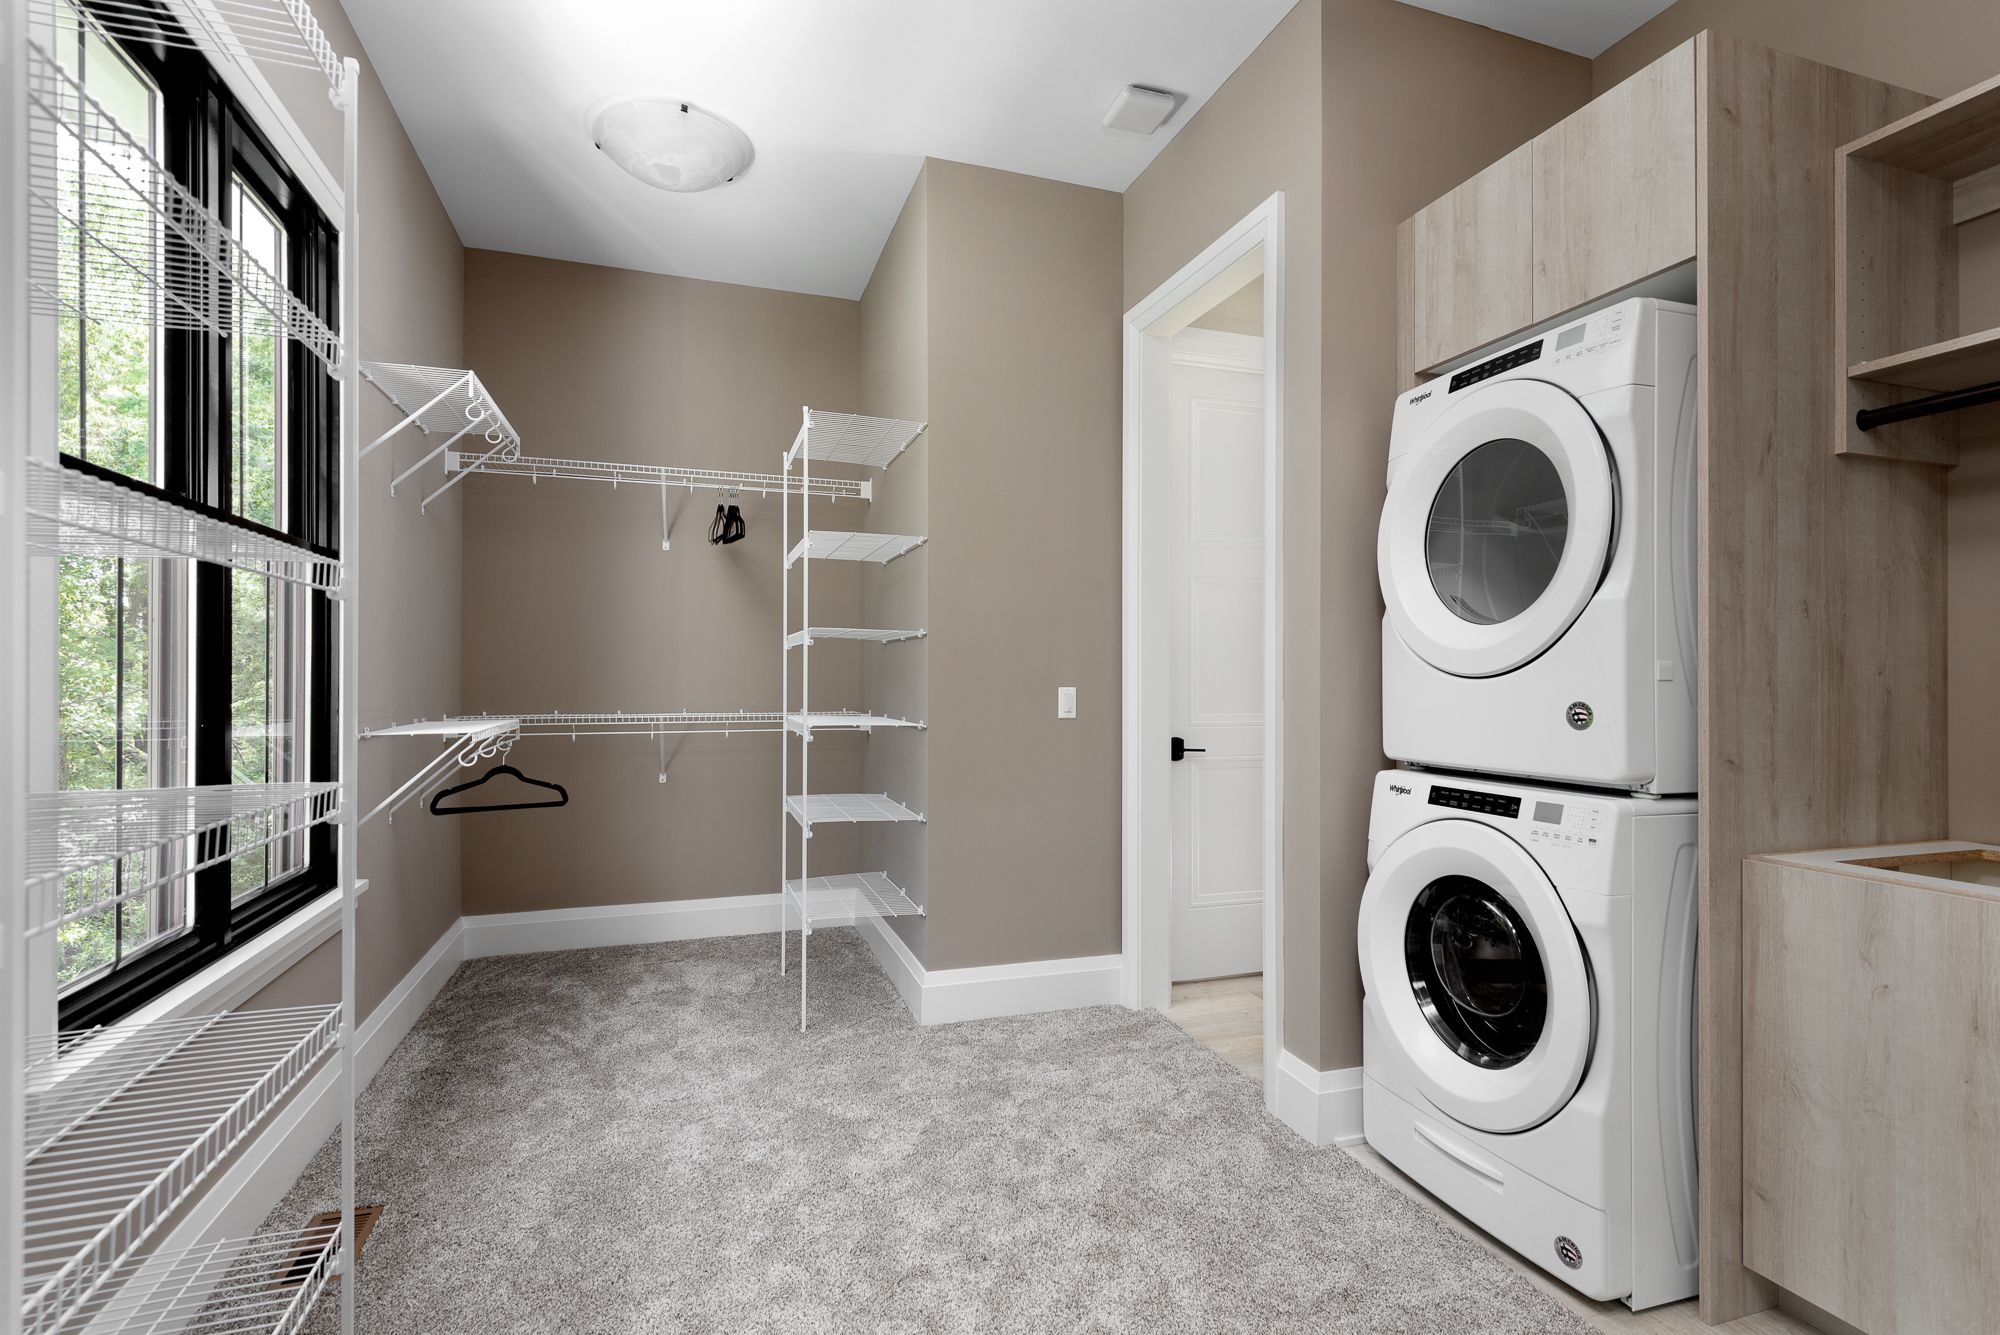 Master bedroom closet with additional washer and dryer and drying racks